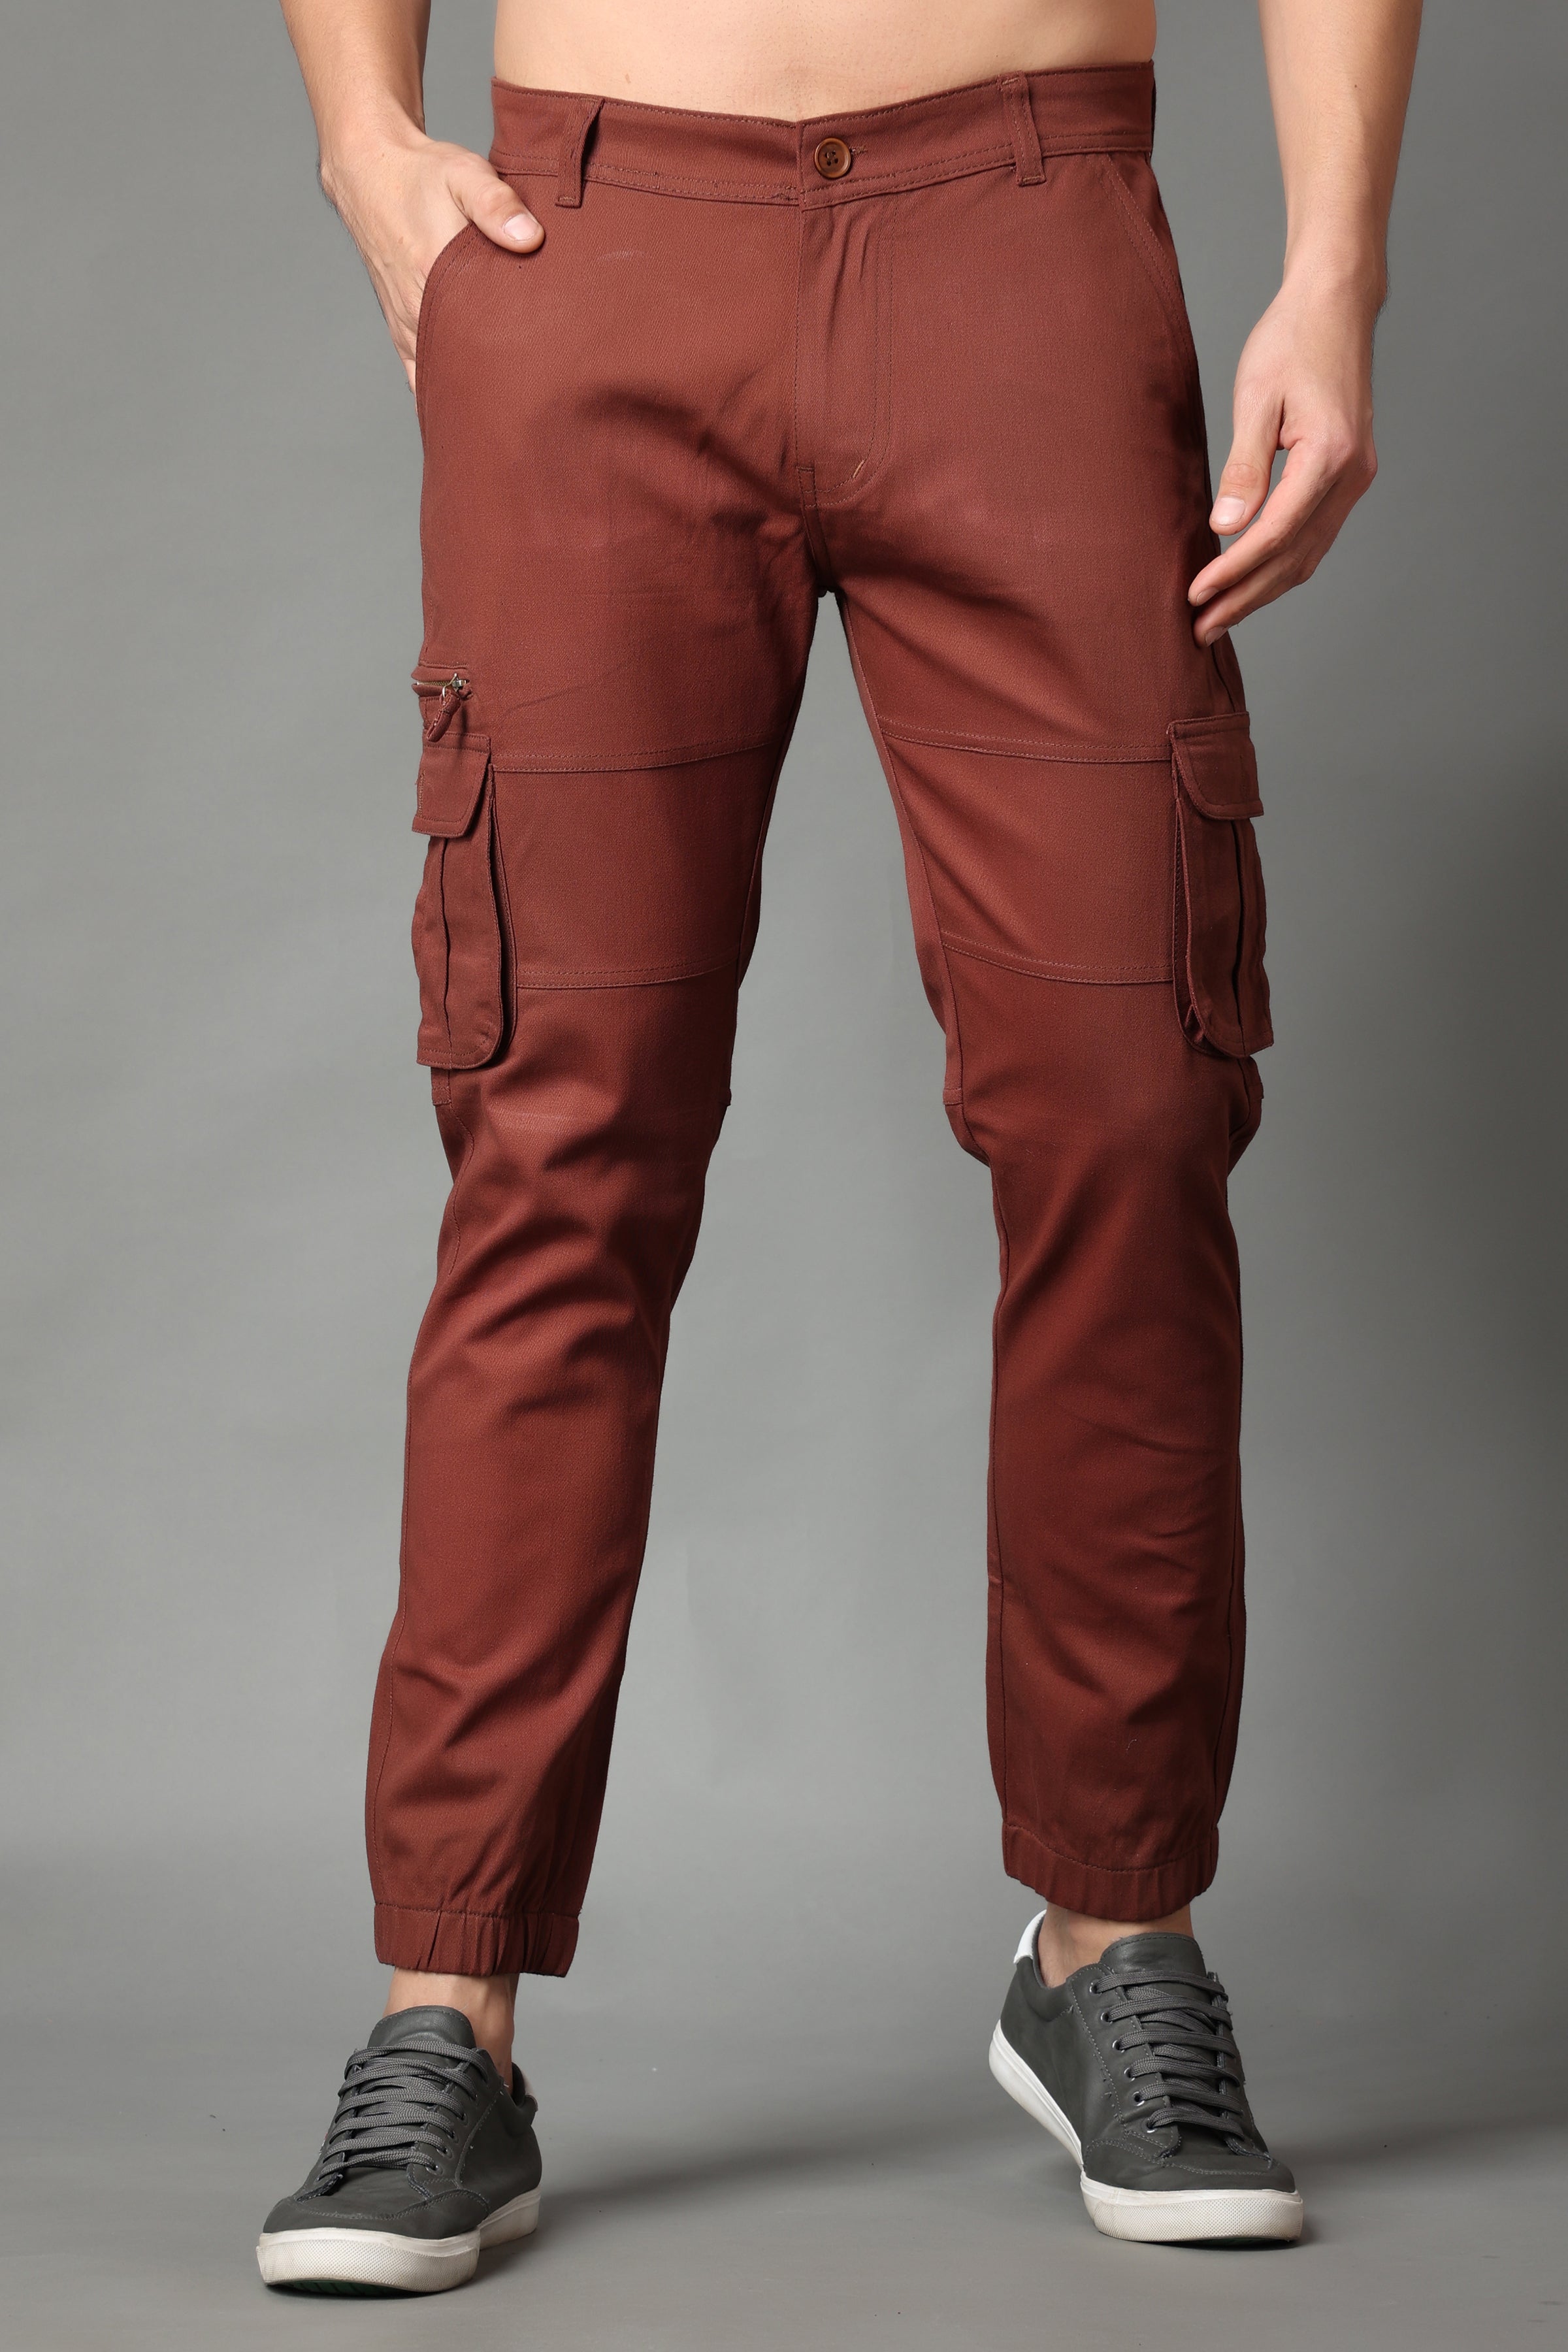 Exploit Cargo Pants - Burgundy – Young & Reckless